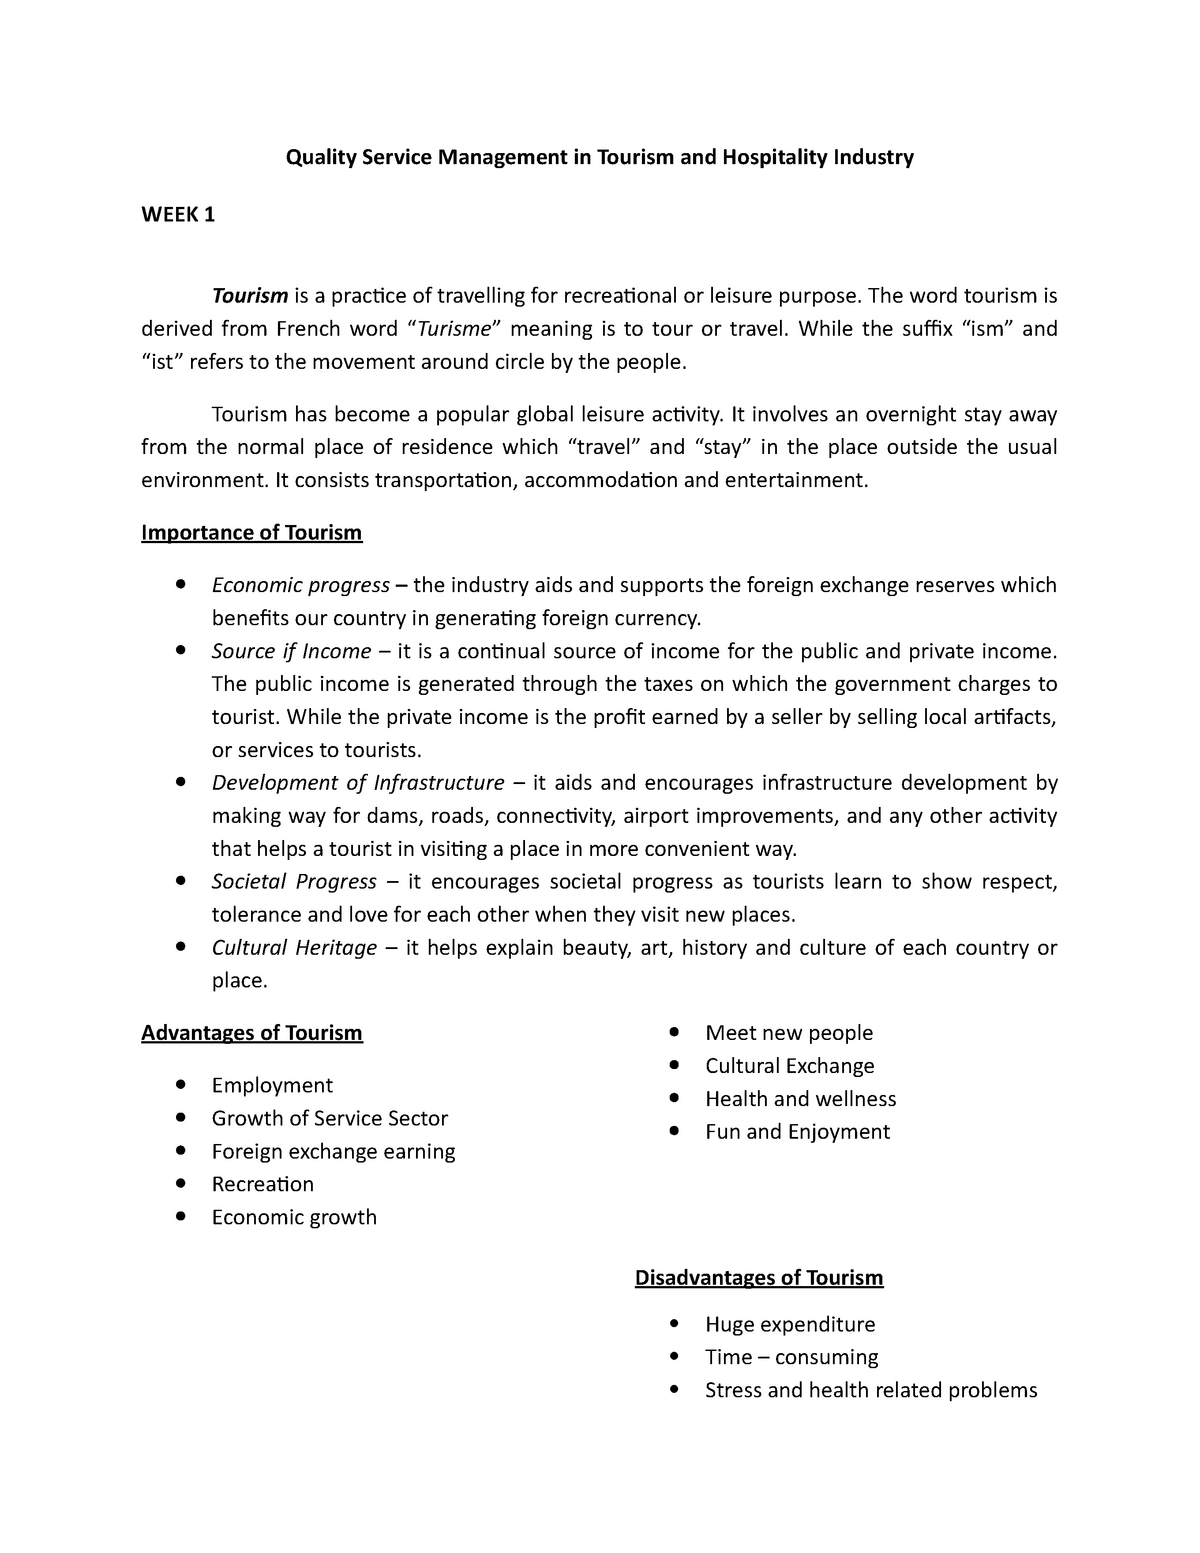 quality service management in tourism and hospitality essay